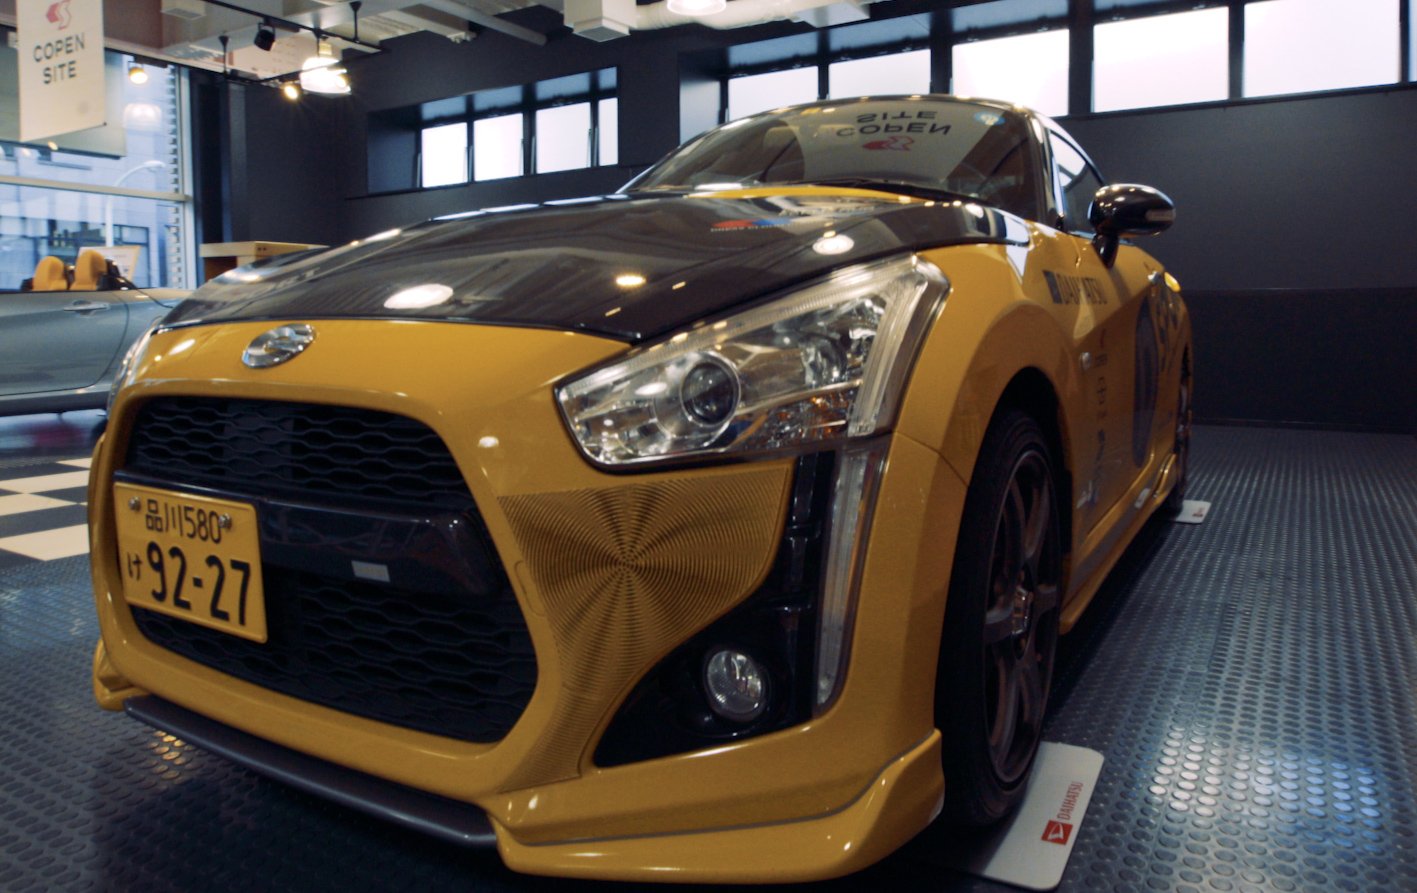  Daihatsu has productionized custom 3D printed panels for their Copen vehicle 